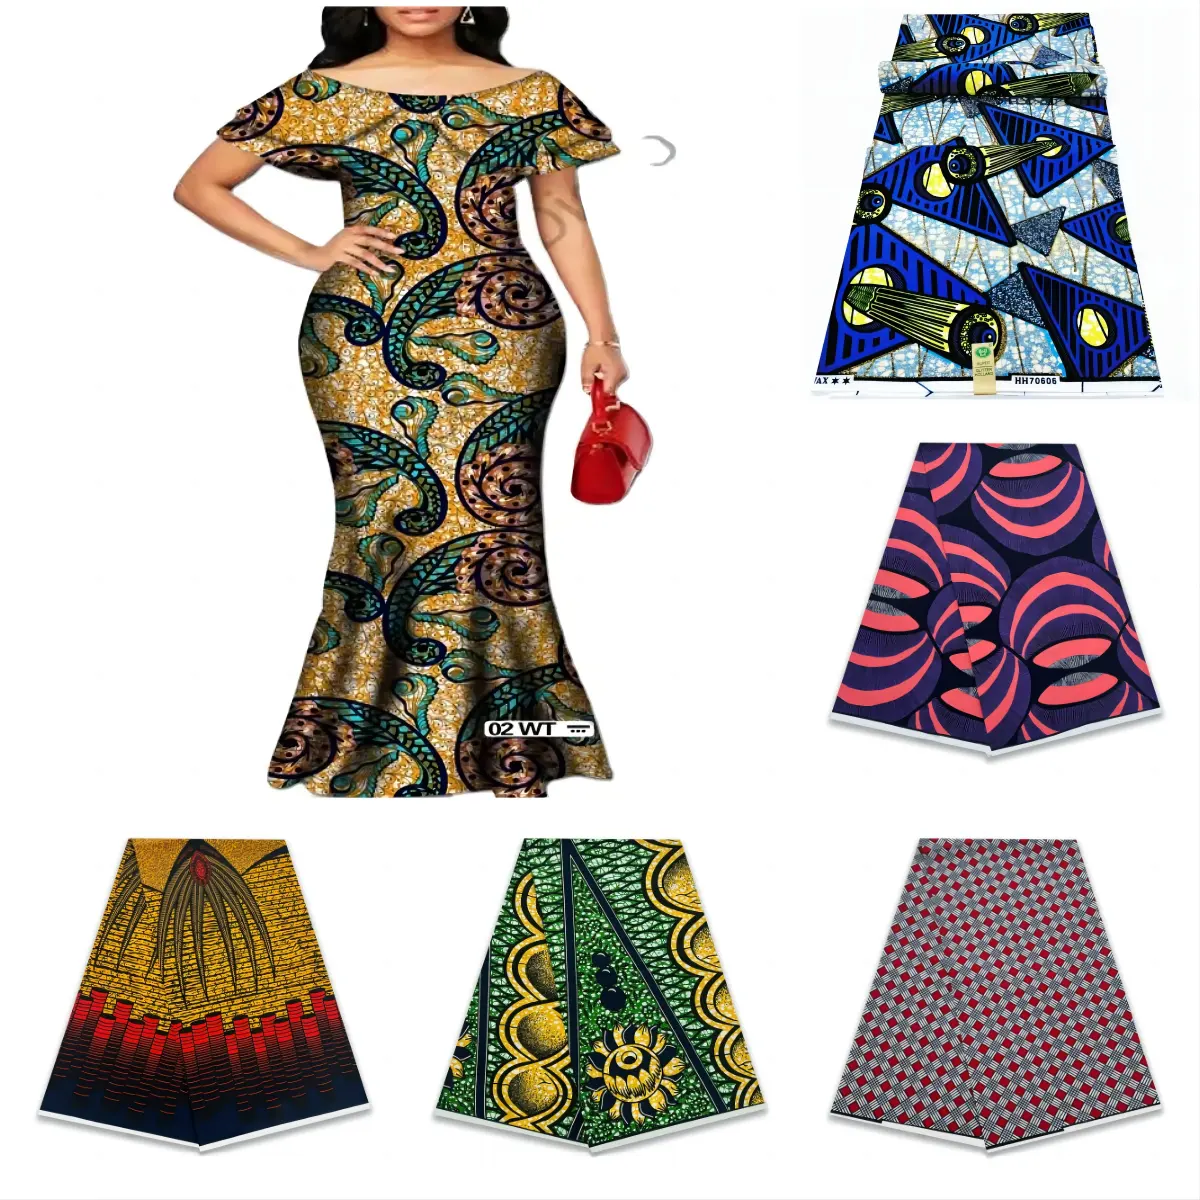 Cotton Floral African Wax Fabric Clothing Accessories for Dresses Factory Wholesale Imprime Dentelle Tissu Africain